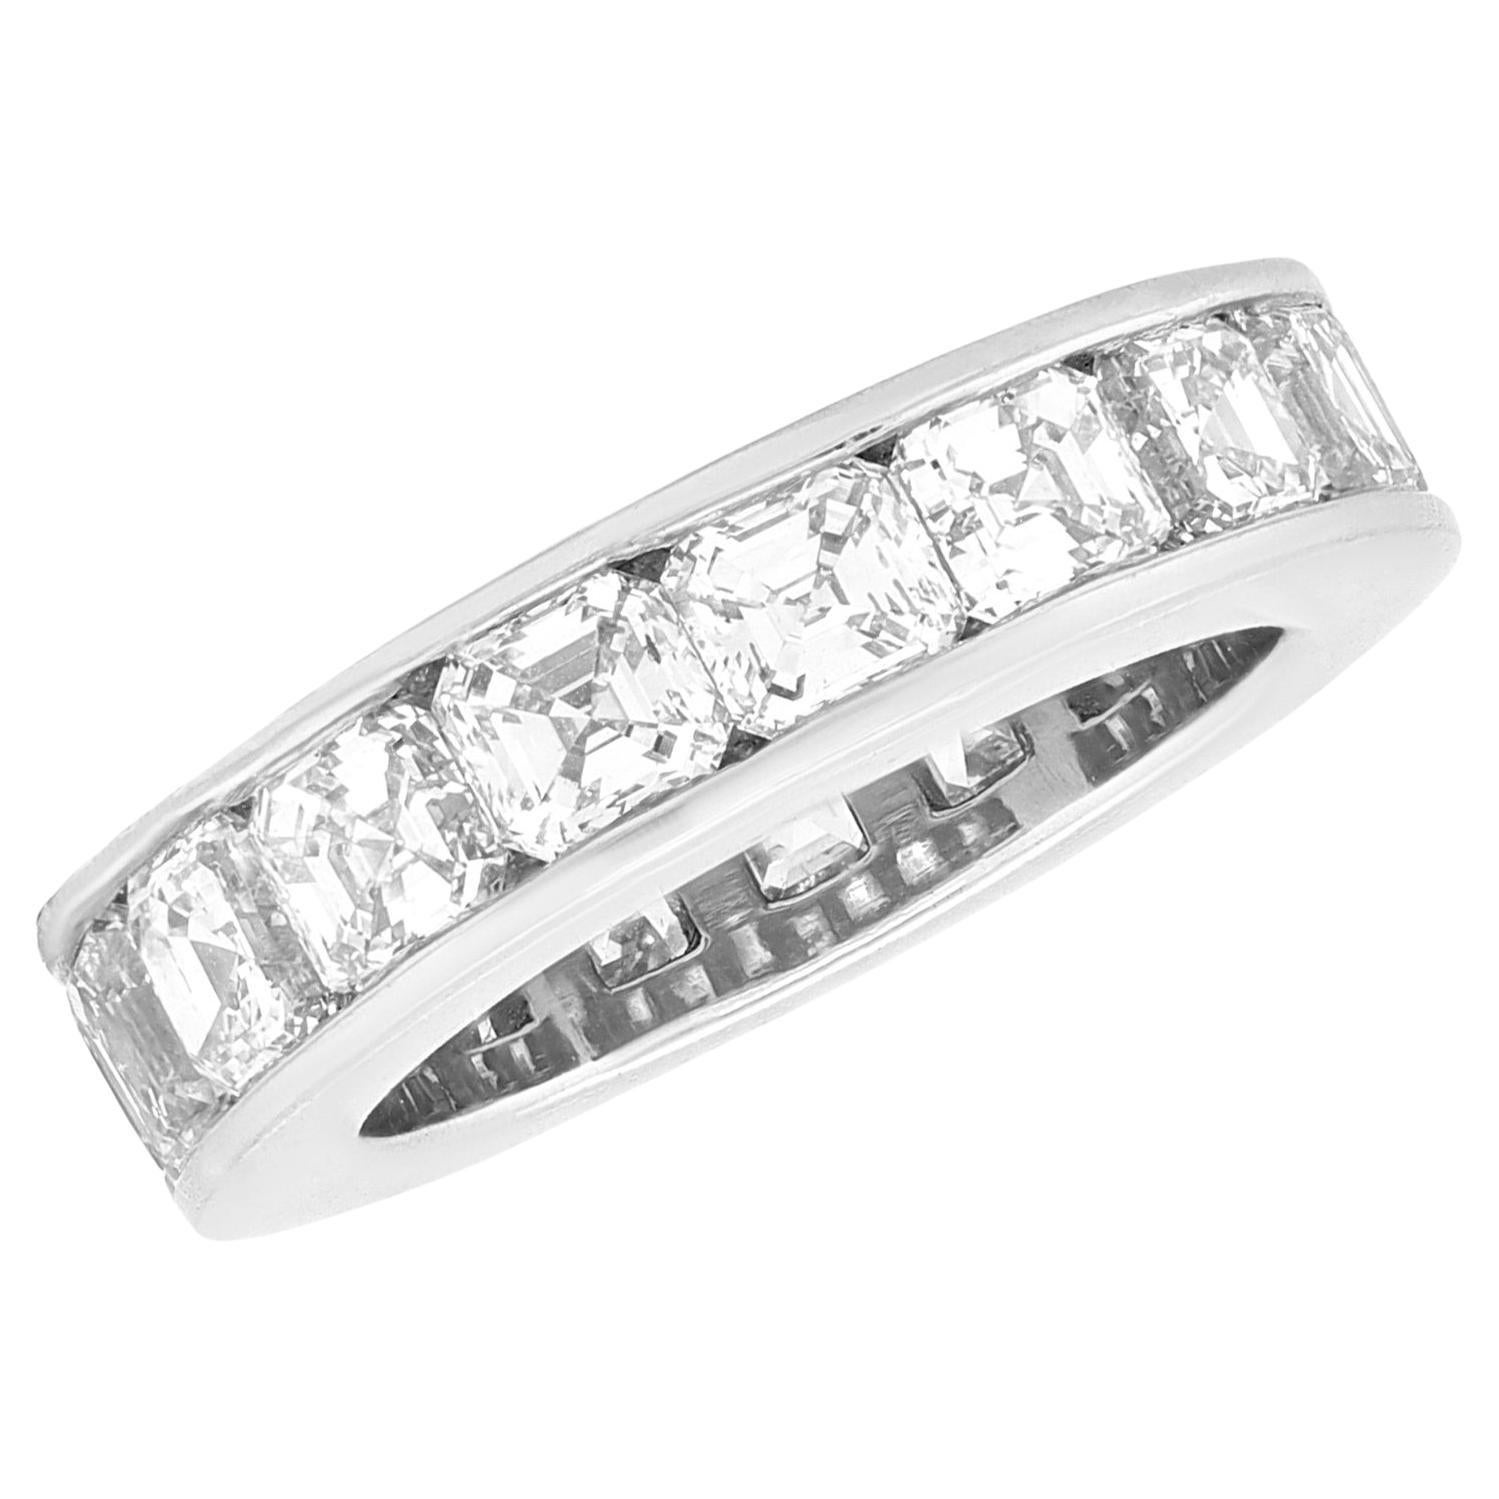 Diana M. platinum diamond channel set eternity band all the way around features  For Sale